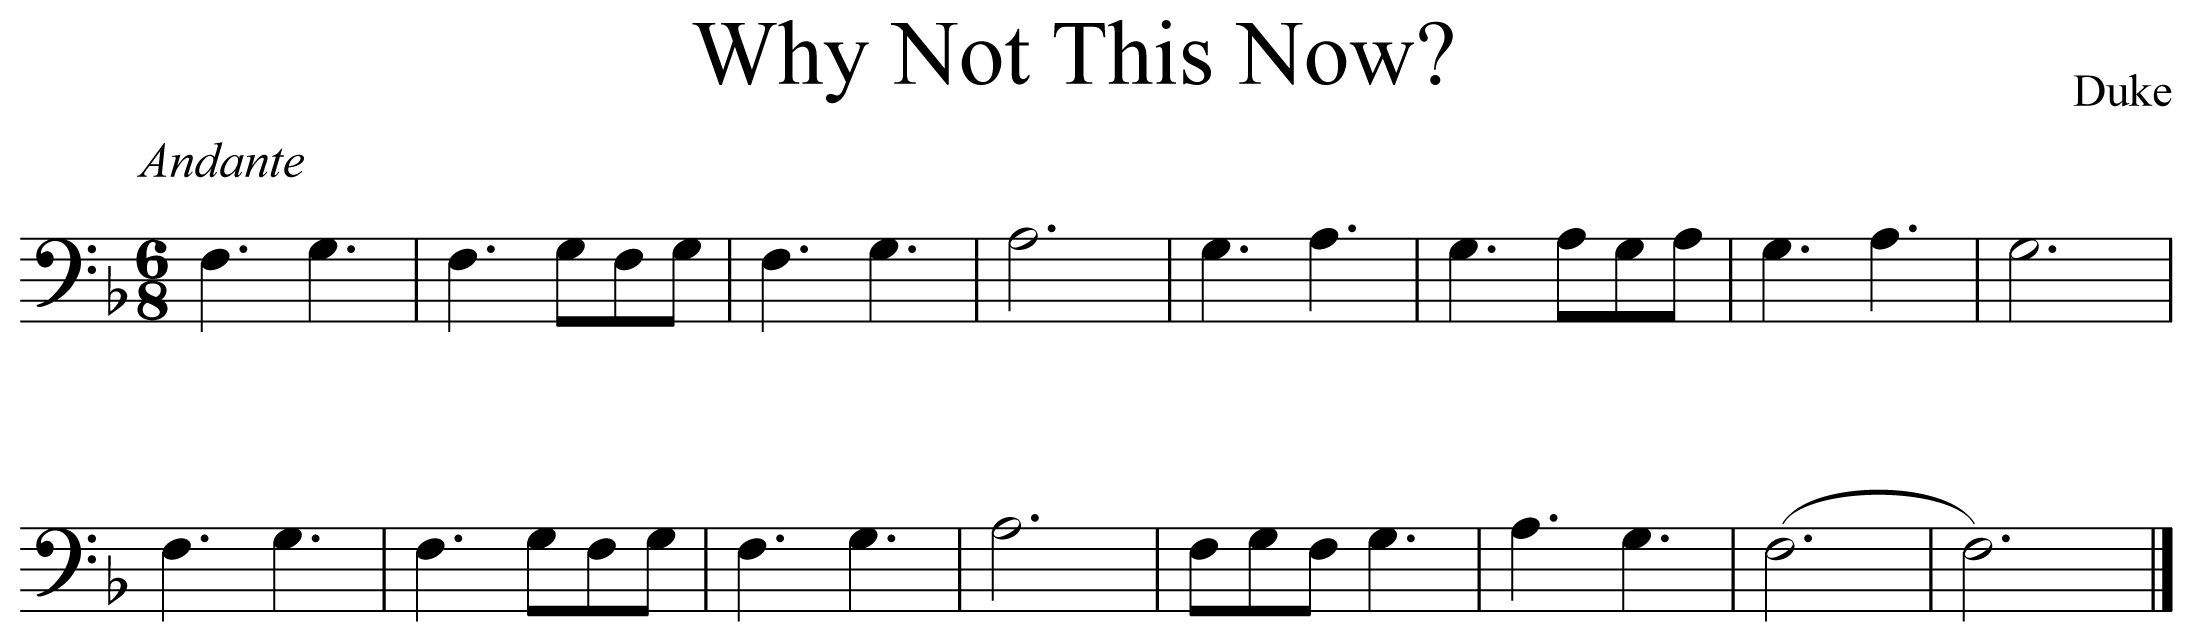 Why Not This Now Music Notation Trombone